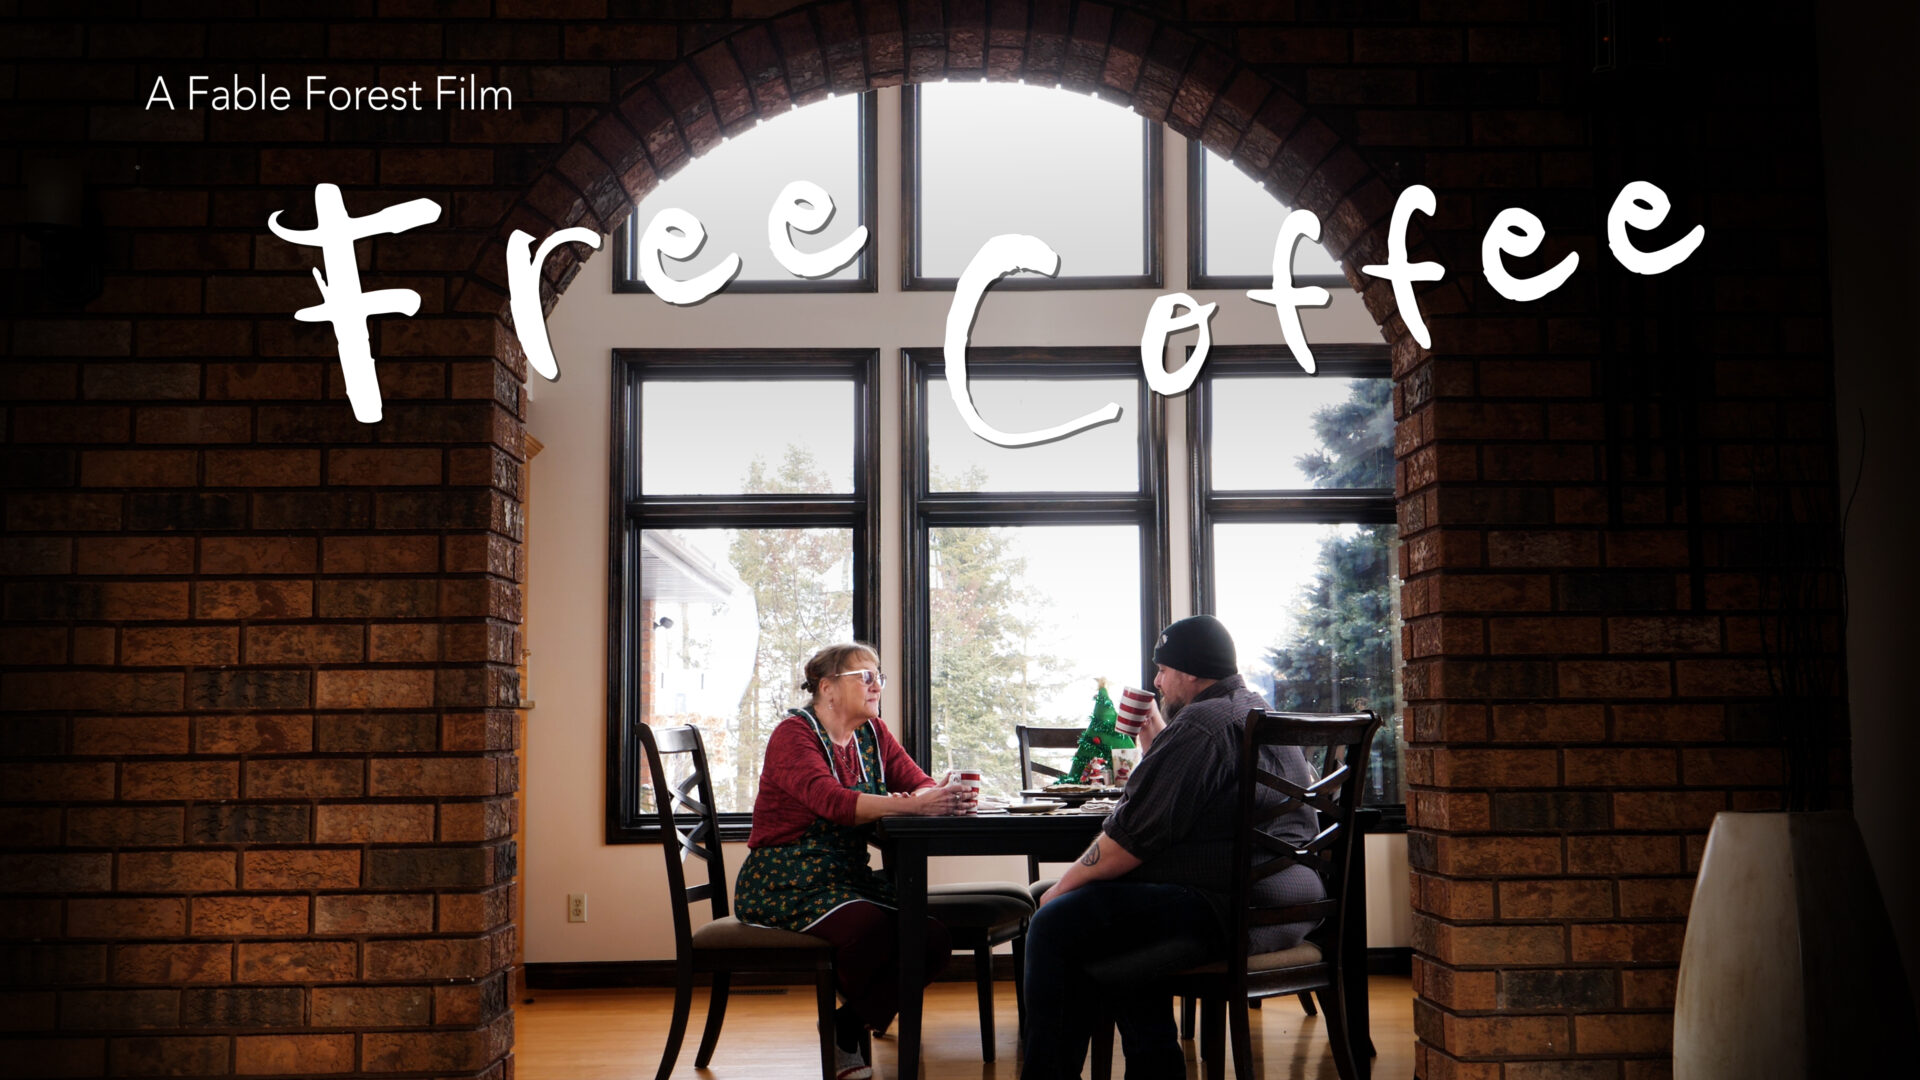 Promotion poster for Free Coffee, featuring a man and woman seated at a table